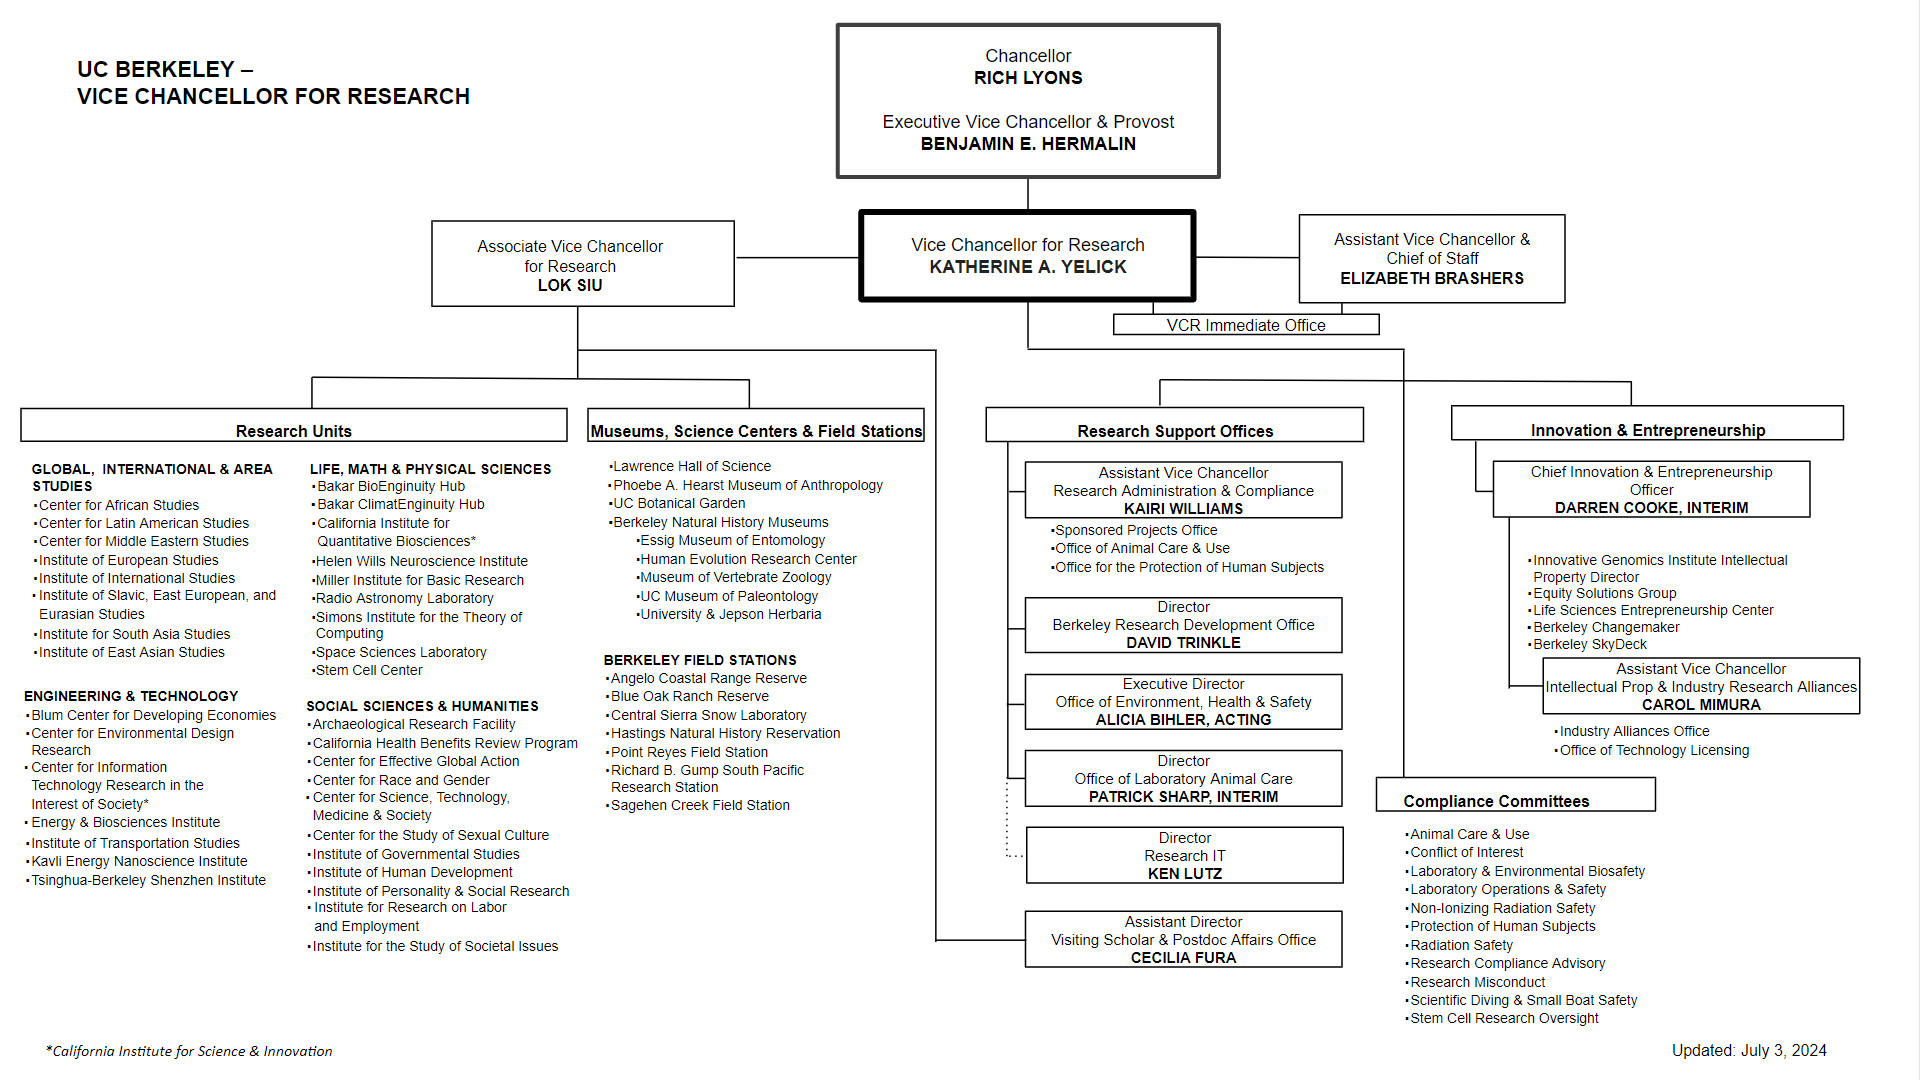 Vice Chancellor for Research Org chart. Link takes you to accessible version.